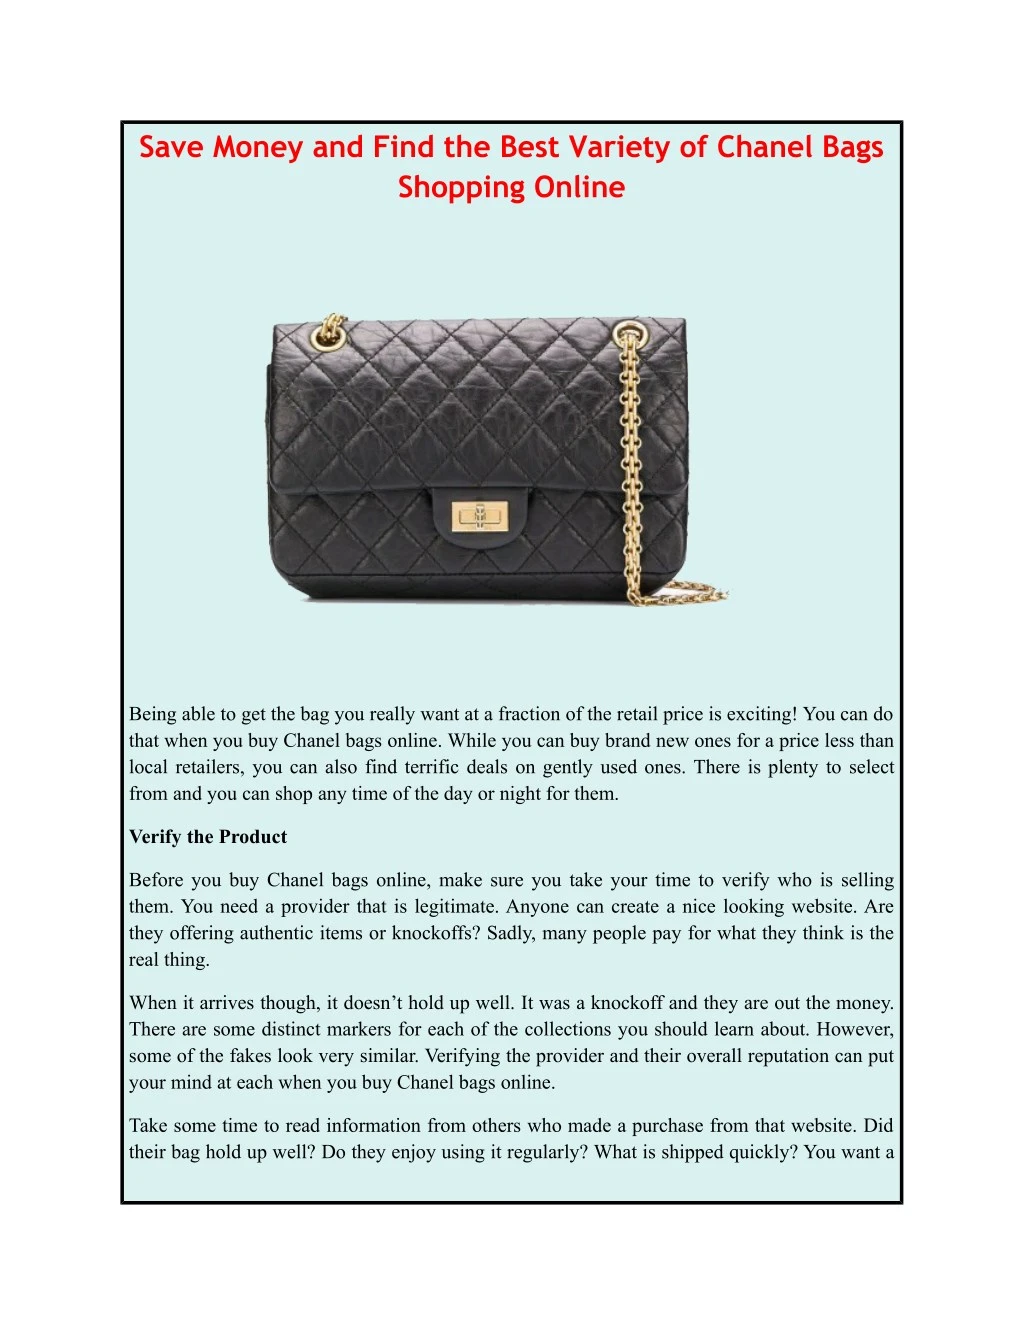 save money and find the best variety of chanel